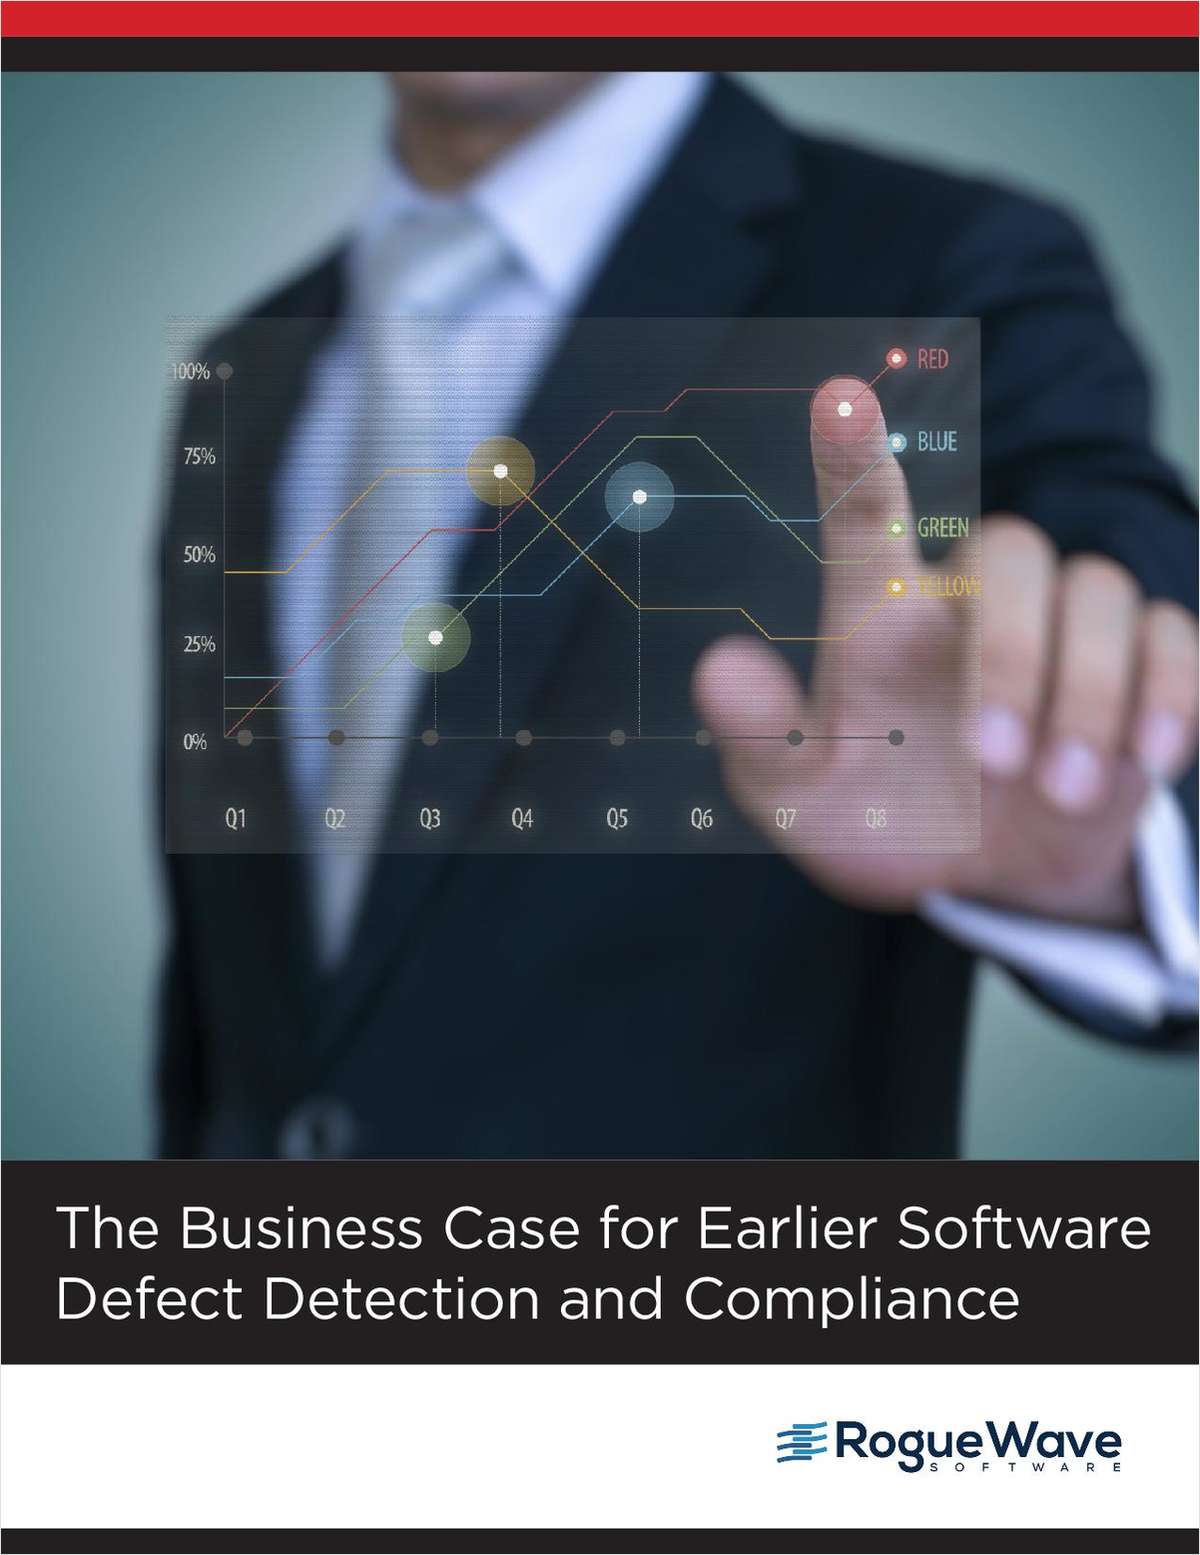 The Business Case for Earlier Software Defect Detection and Compliance